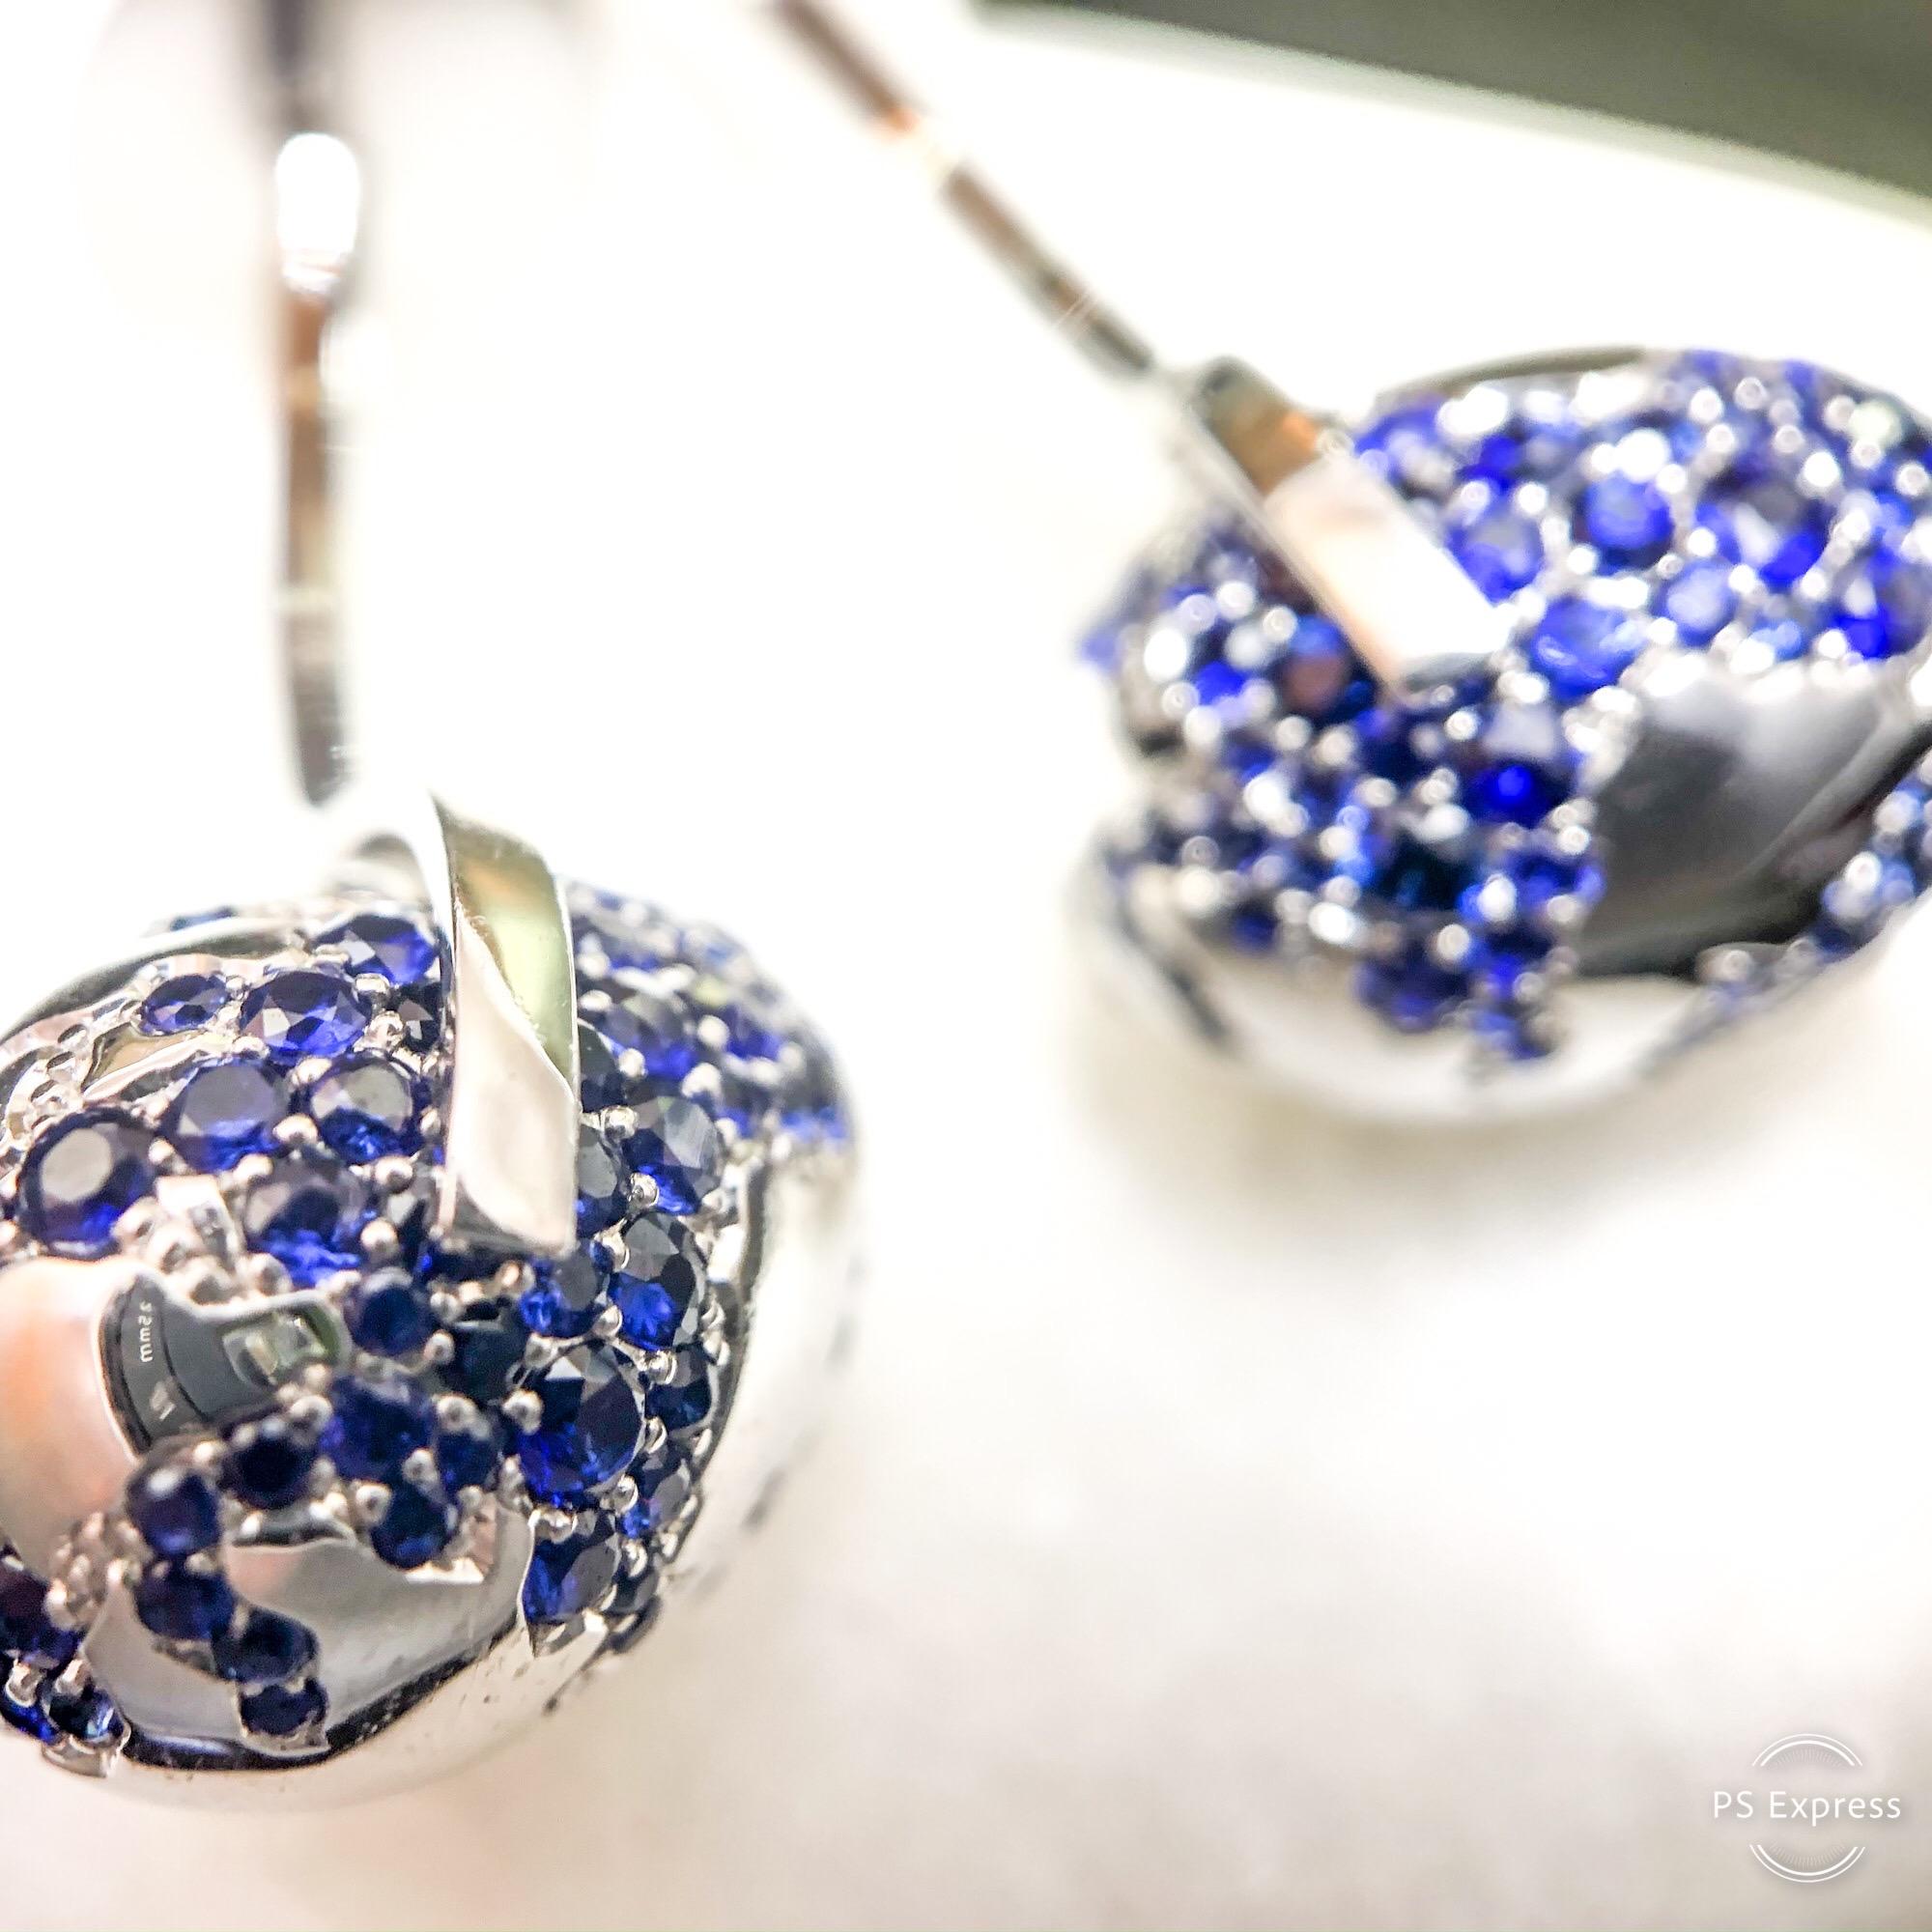 This amazing pair of cufflinks with blue sapphires is handcrafted in white gold showing the 